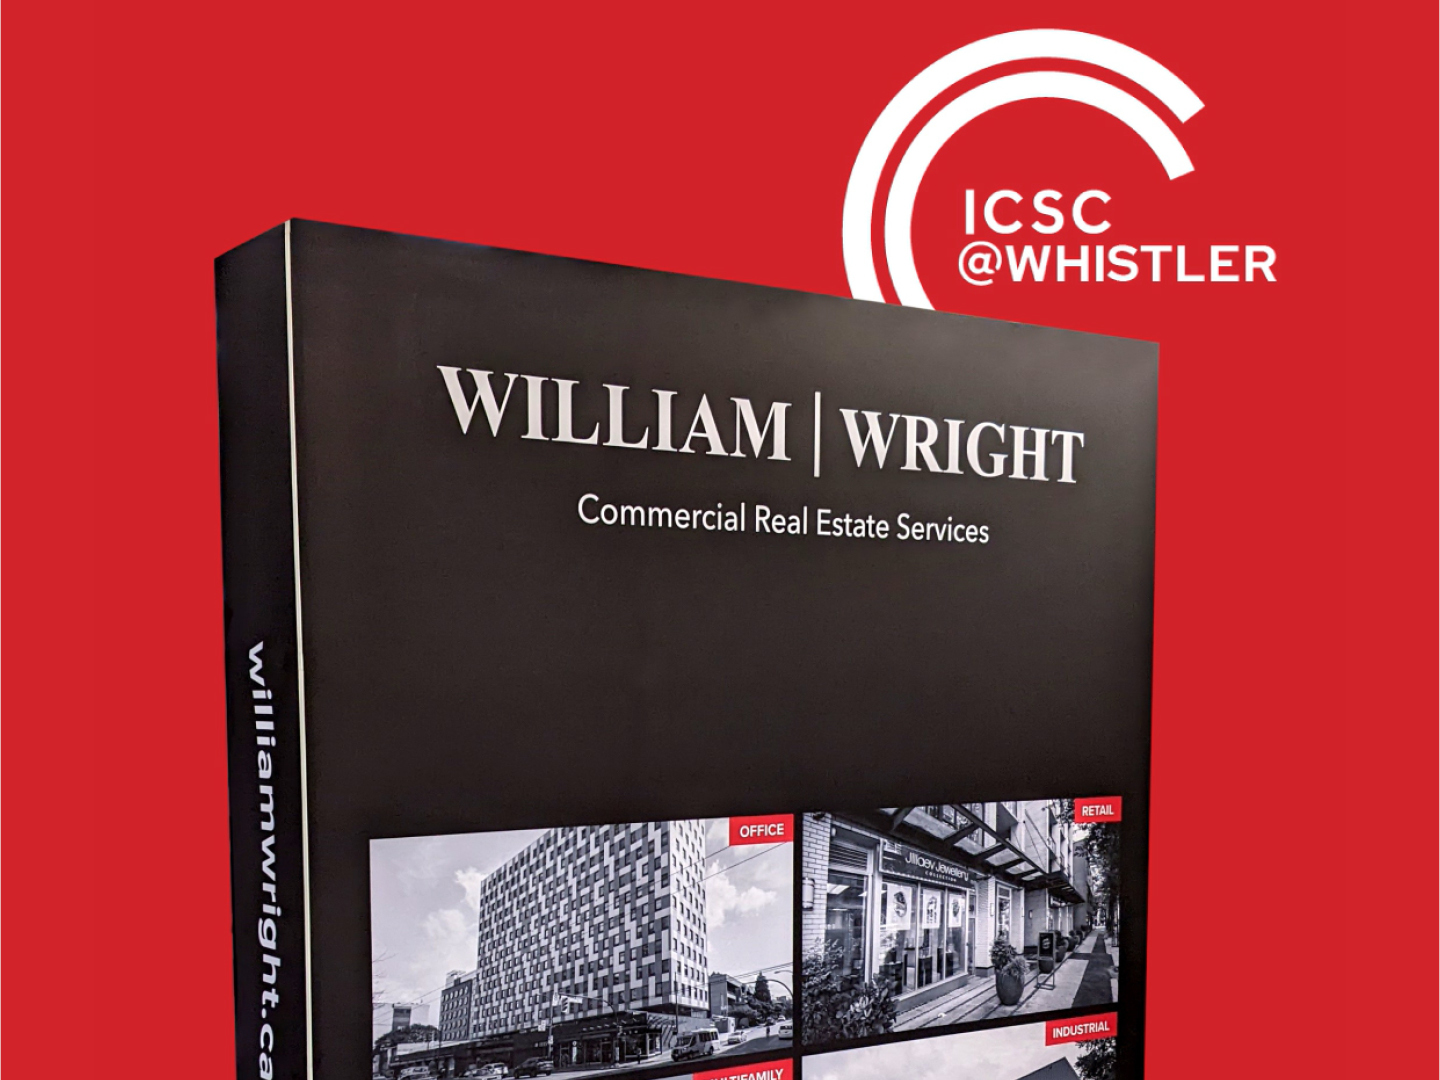 William Wright Commercial at ICSC@Whistler, March 27–29, 2022